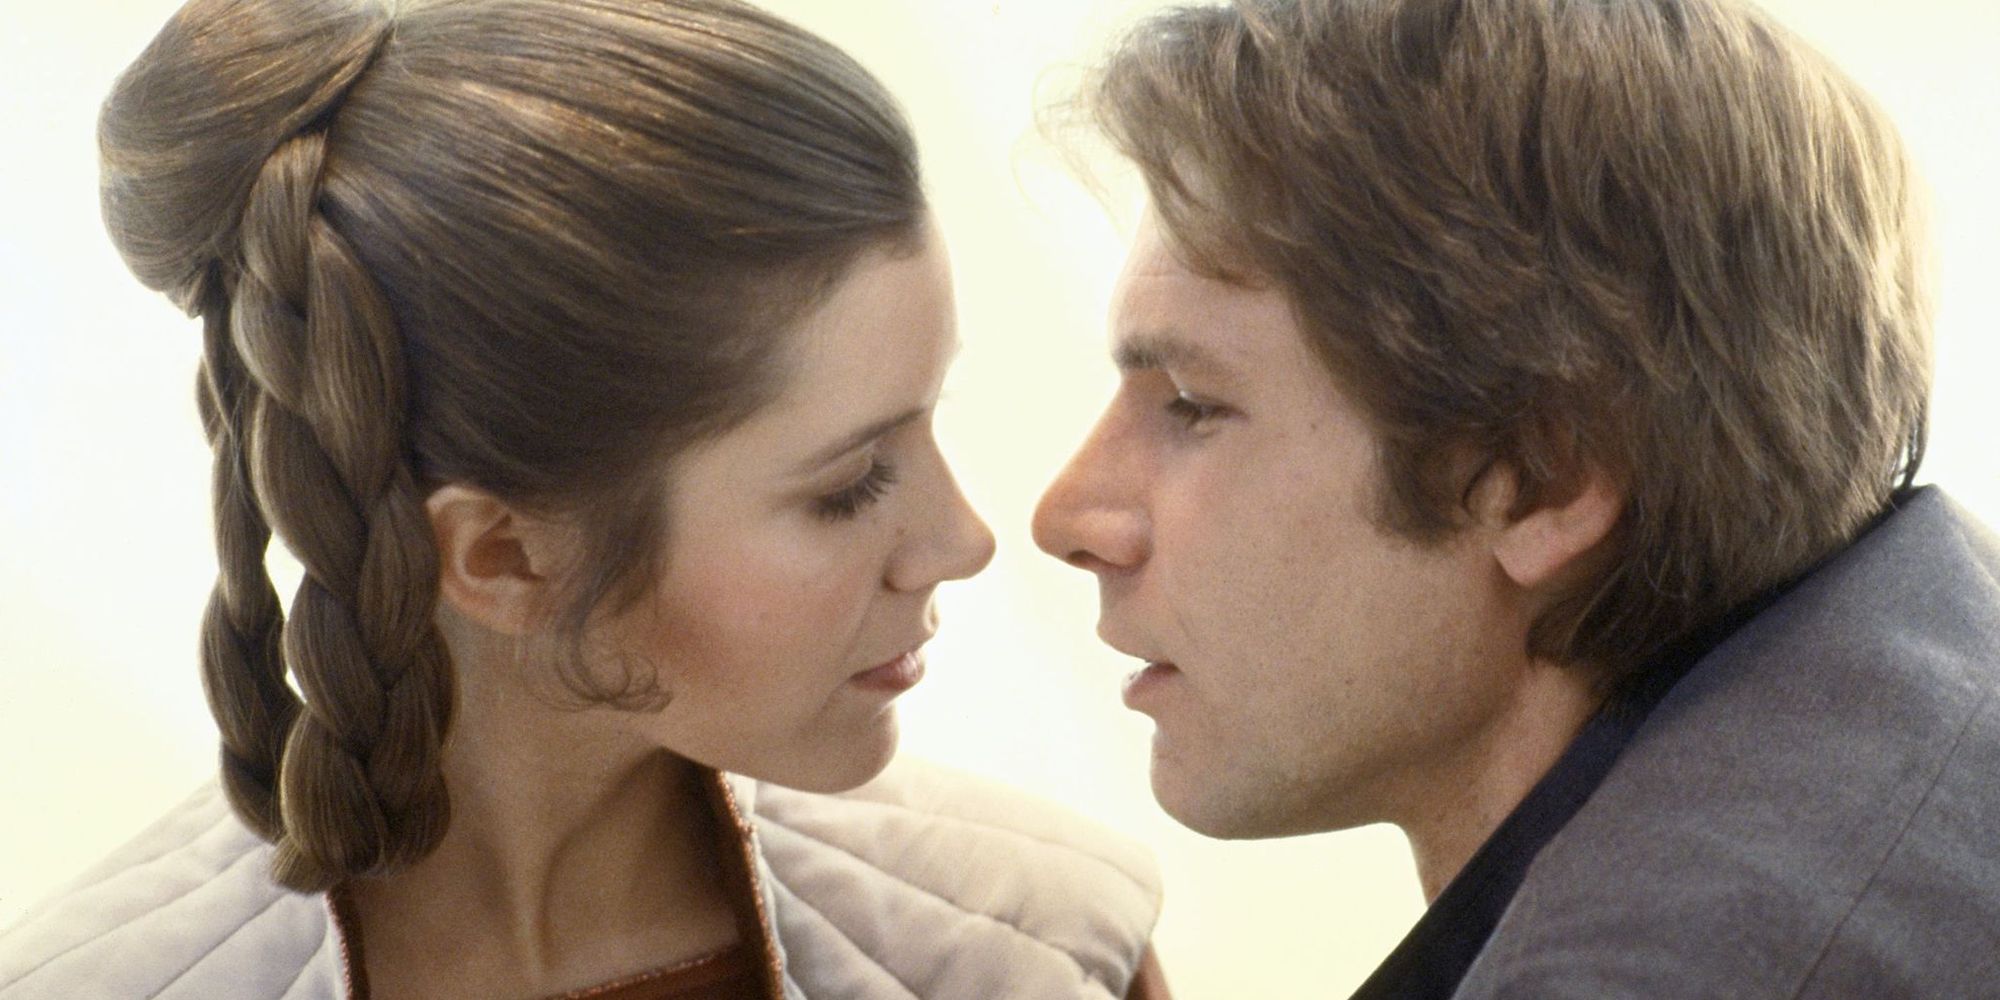 Princess Leia and Han Solo in Star Wars 